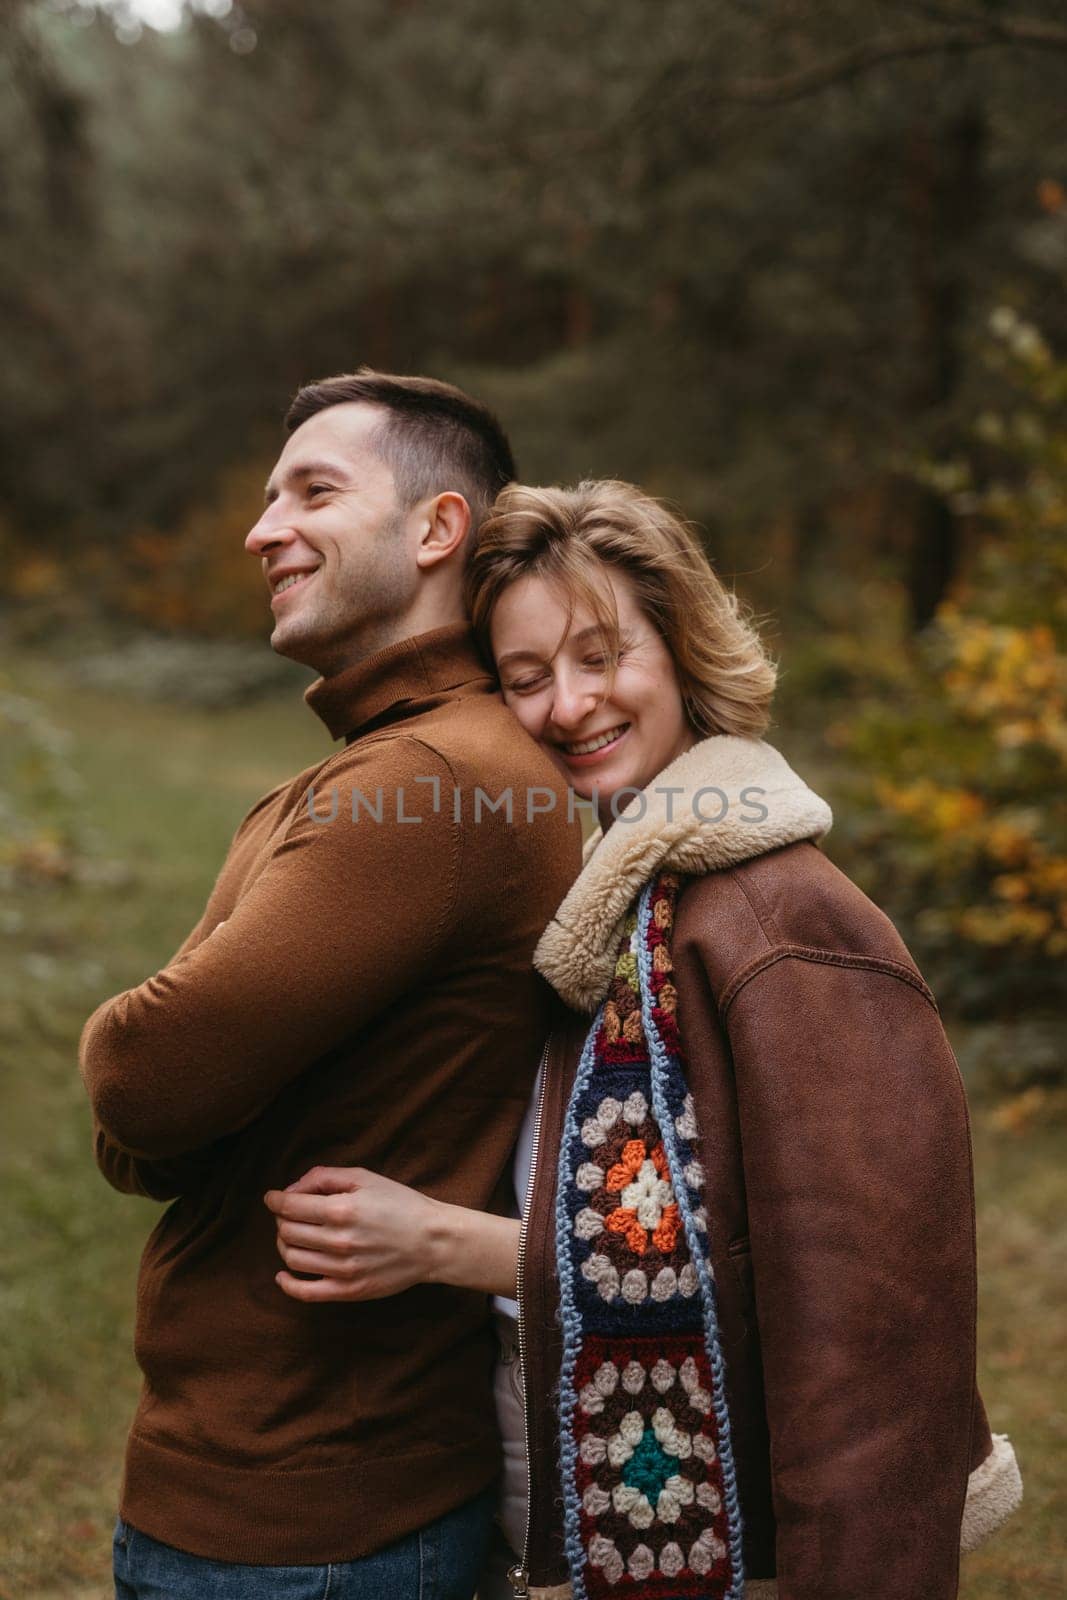 Smiling caucasian woman hugs man from behind, happy couple spending time in autumn park outdoors